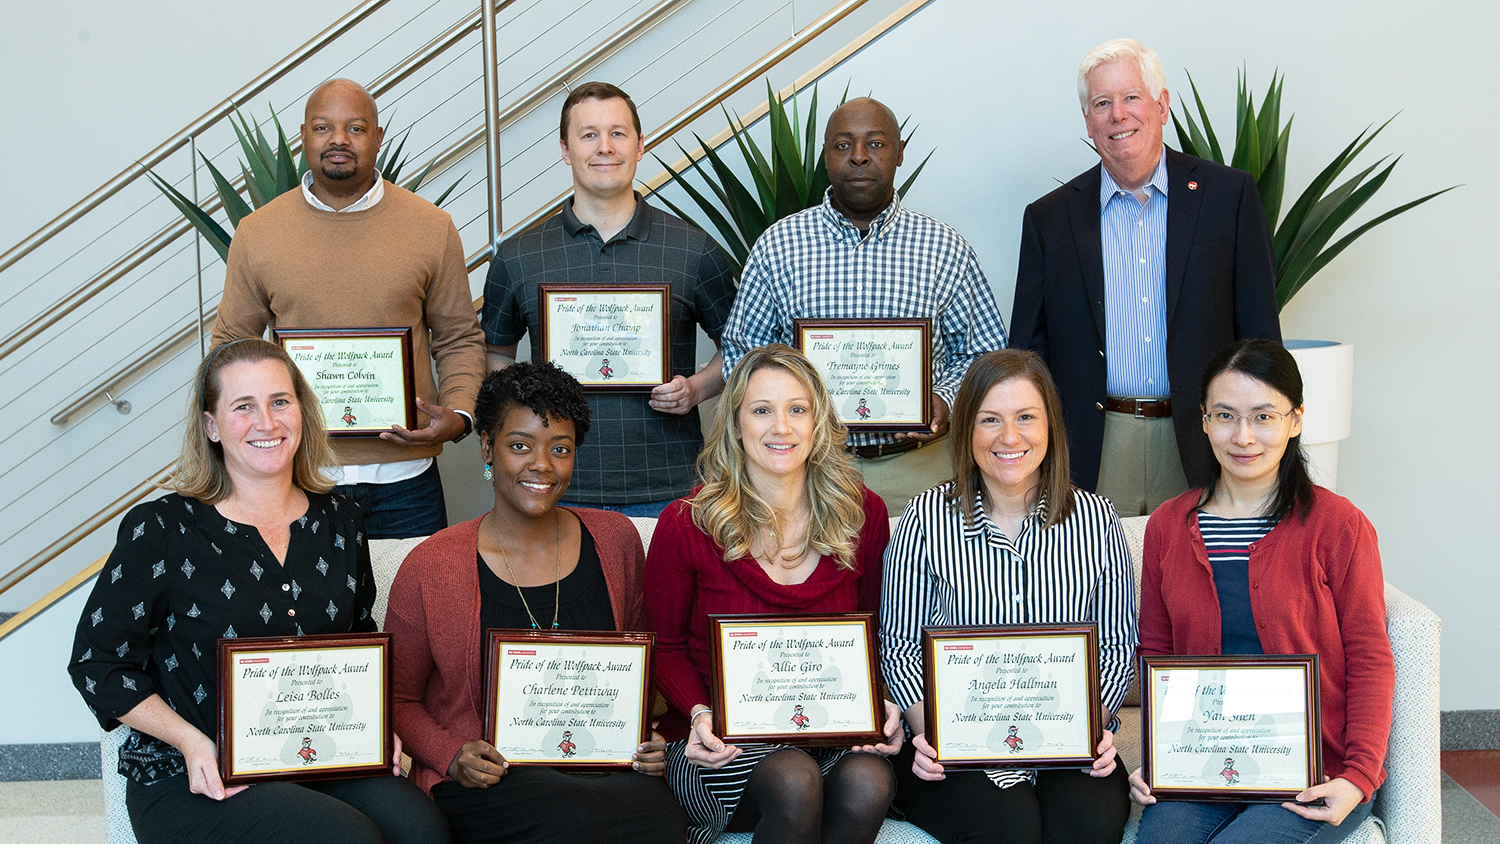 2018 Pride of the Wolfpack Recipients pictured with Senior Vice Provost Tom Miller. Back row left to right: Shawn Colvin, Jonathan Champ, Tremayne Grimes and Tom Miller. Front row left to right: Leisa Bolles, Charlene Pettiway, Allie Giro, Angela Hallman and Yan Shen.